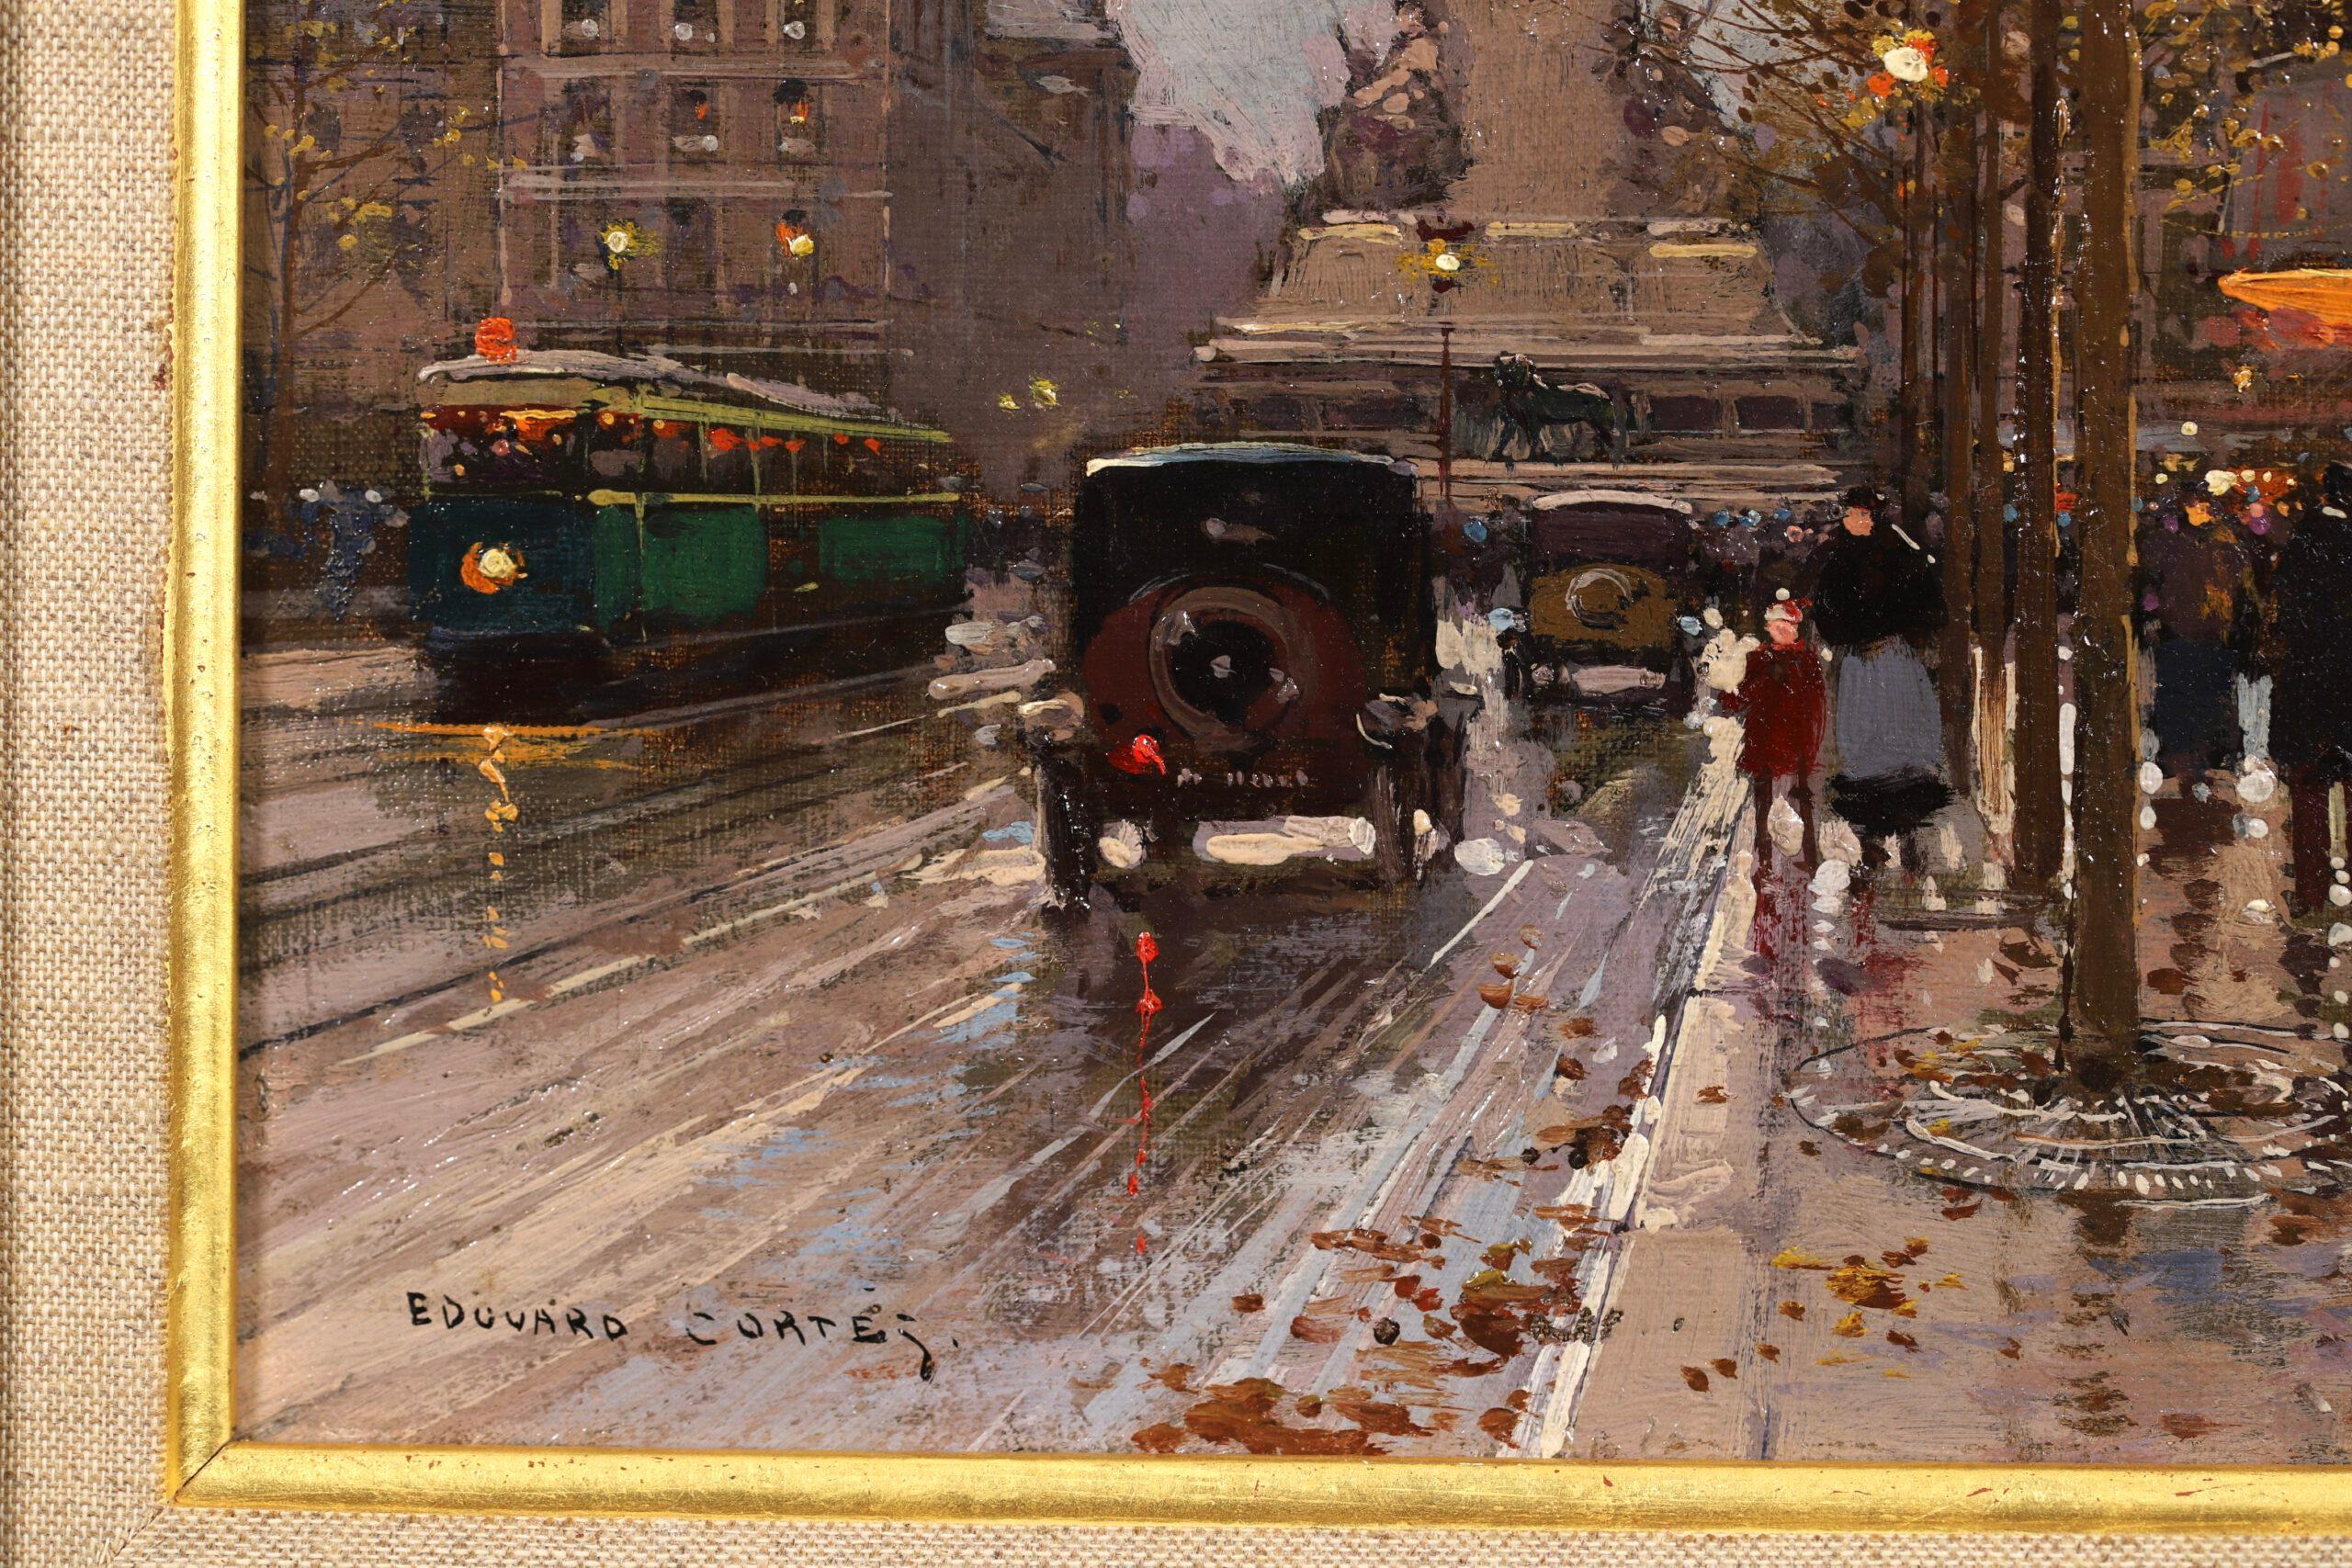 Signed impressionist oil on canvas figures in cityscape circa 1935 by sought after French painter Edouard Cortes. The work depicts an autumnal scene of the Place de la Republique square in Paris France. The the last of the leaves are falling from